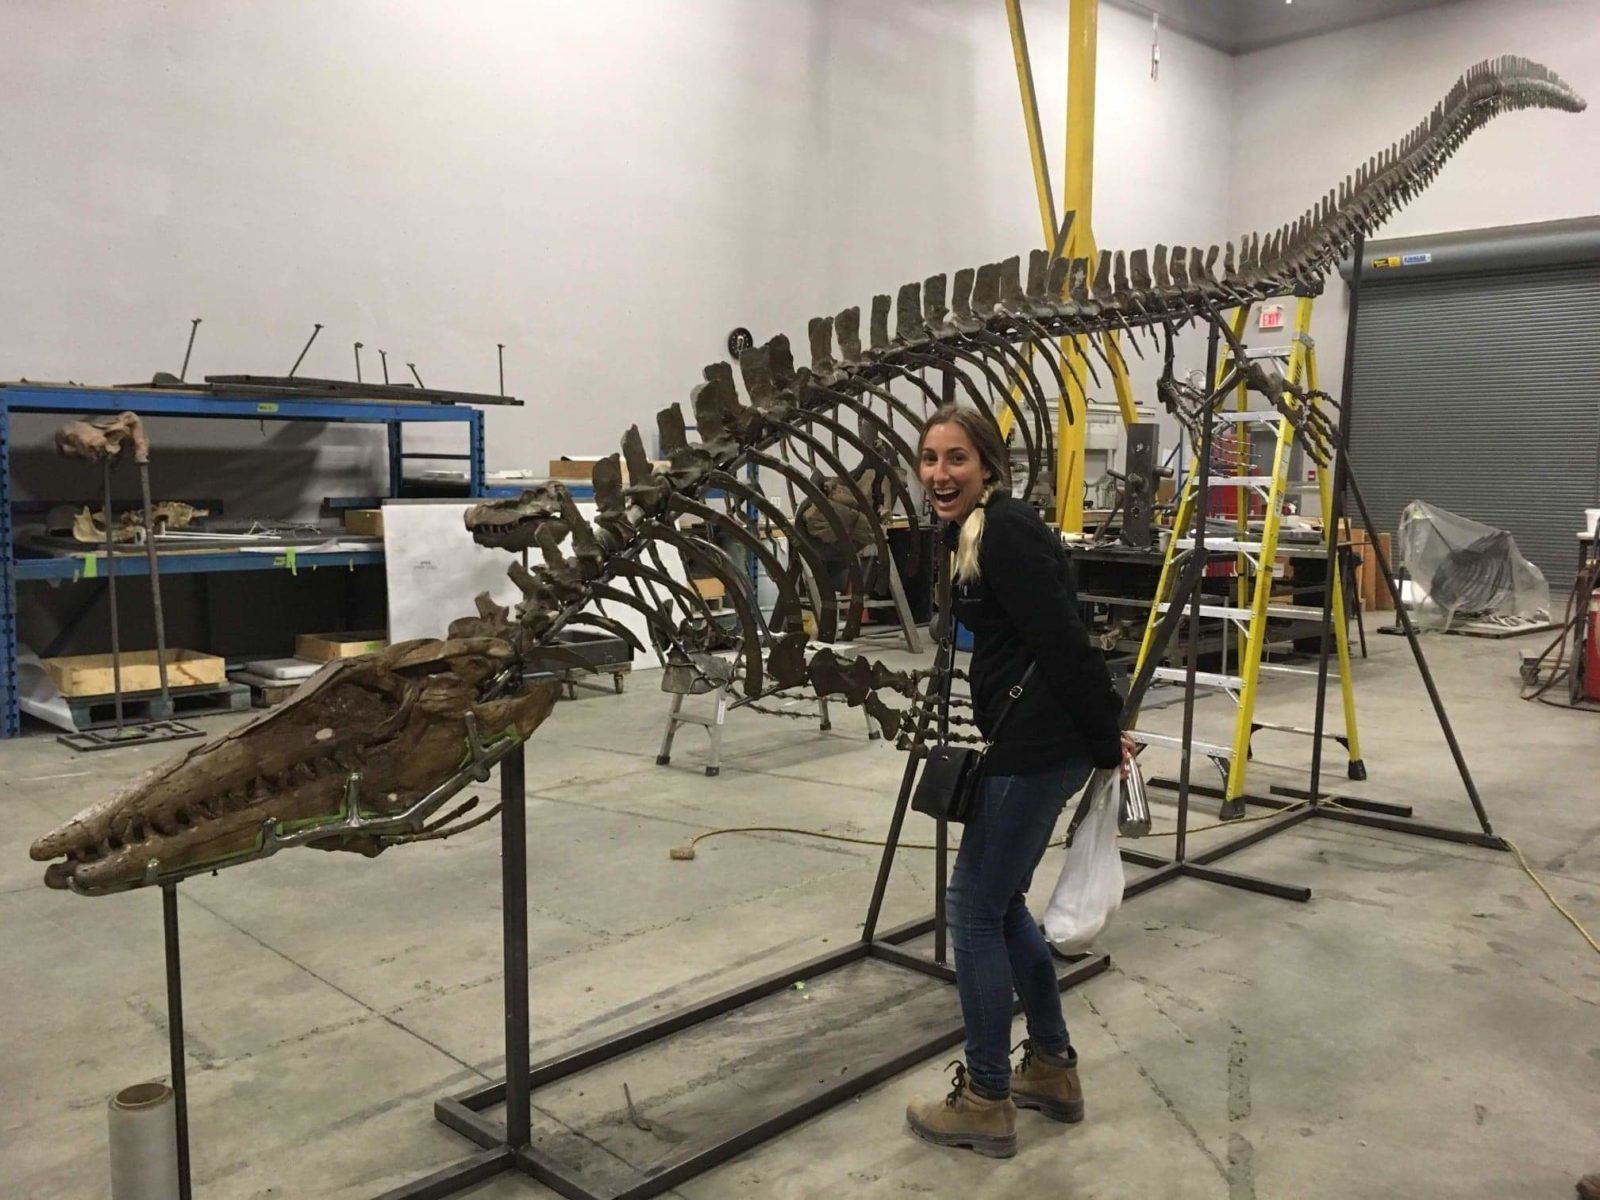 Deanna posing in front of a dinosaur skeleton excited about her new job working with fossils (before she became a professional photographer)